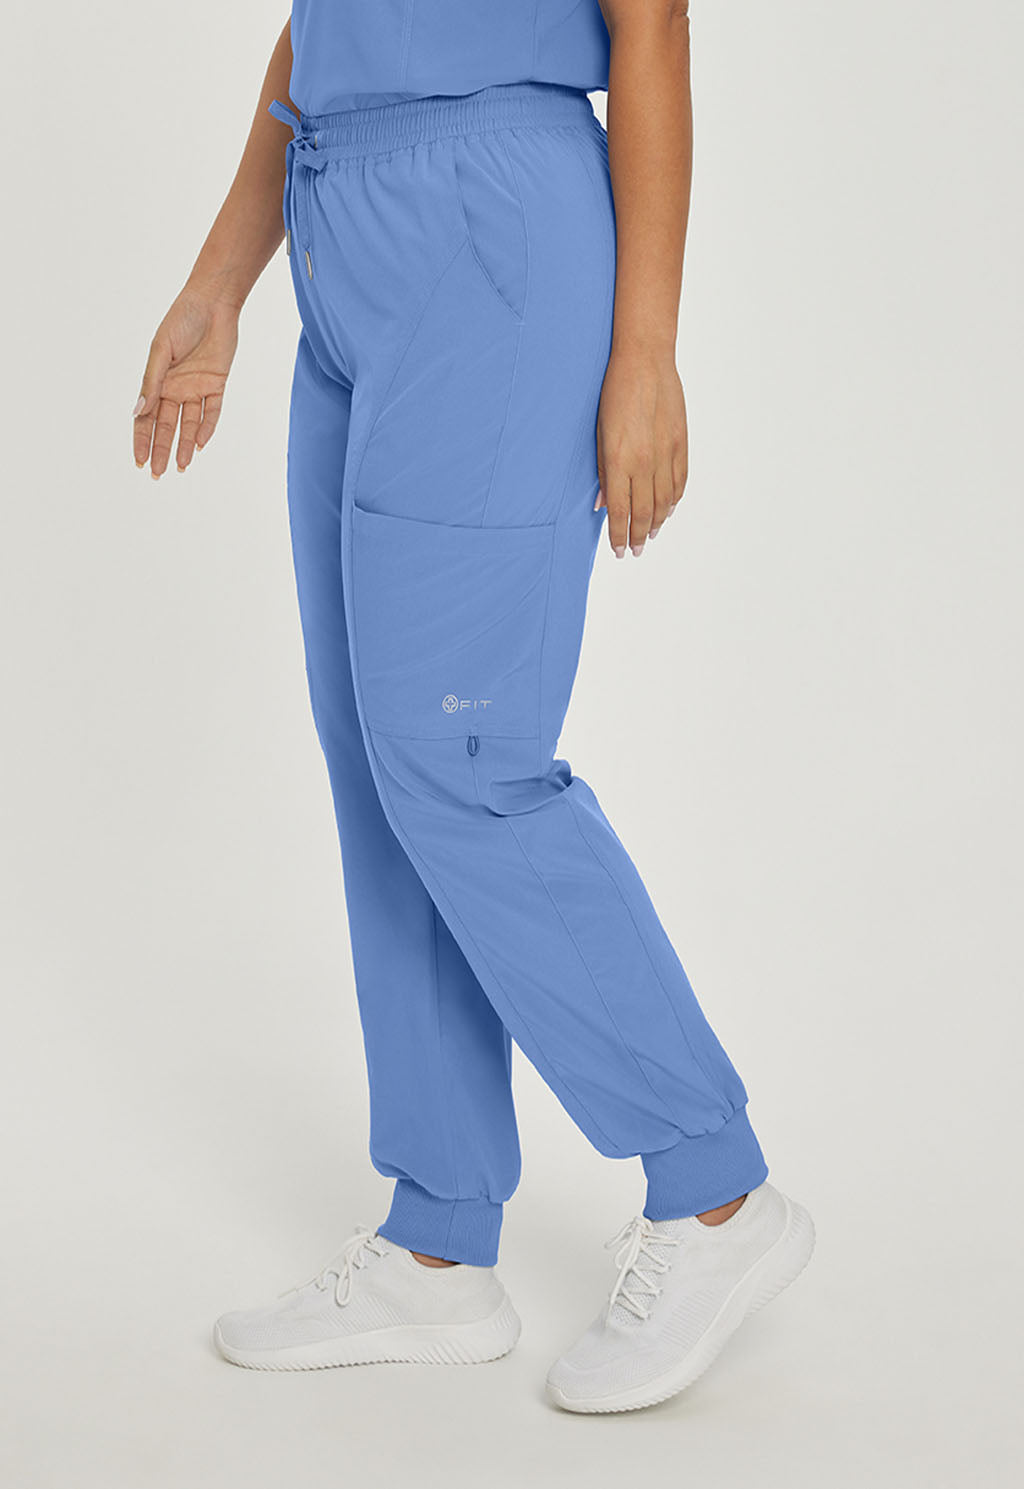 Product - WhiteCross Women's Scrub Set Fit Collection